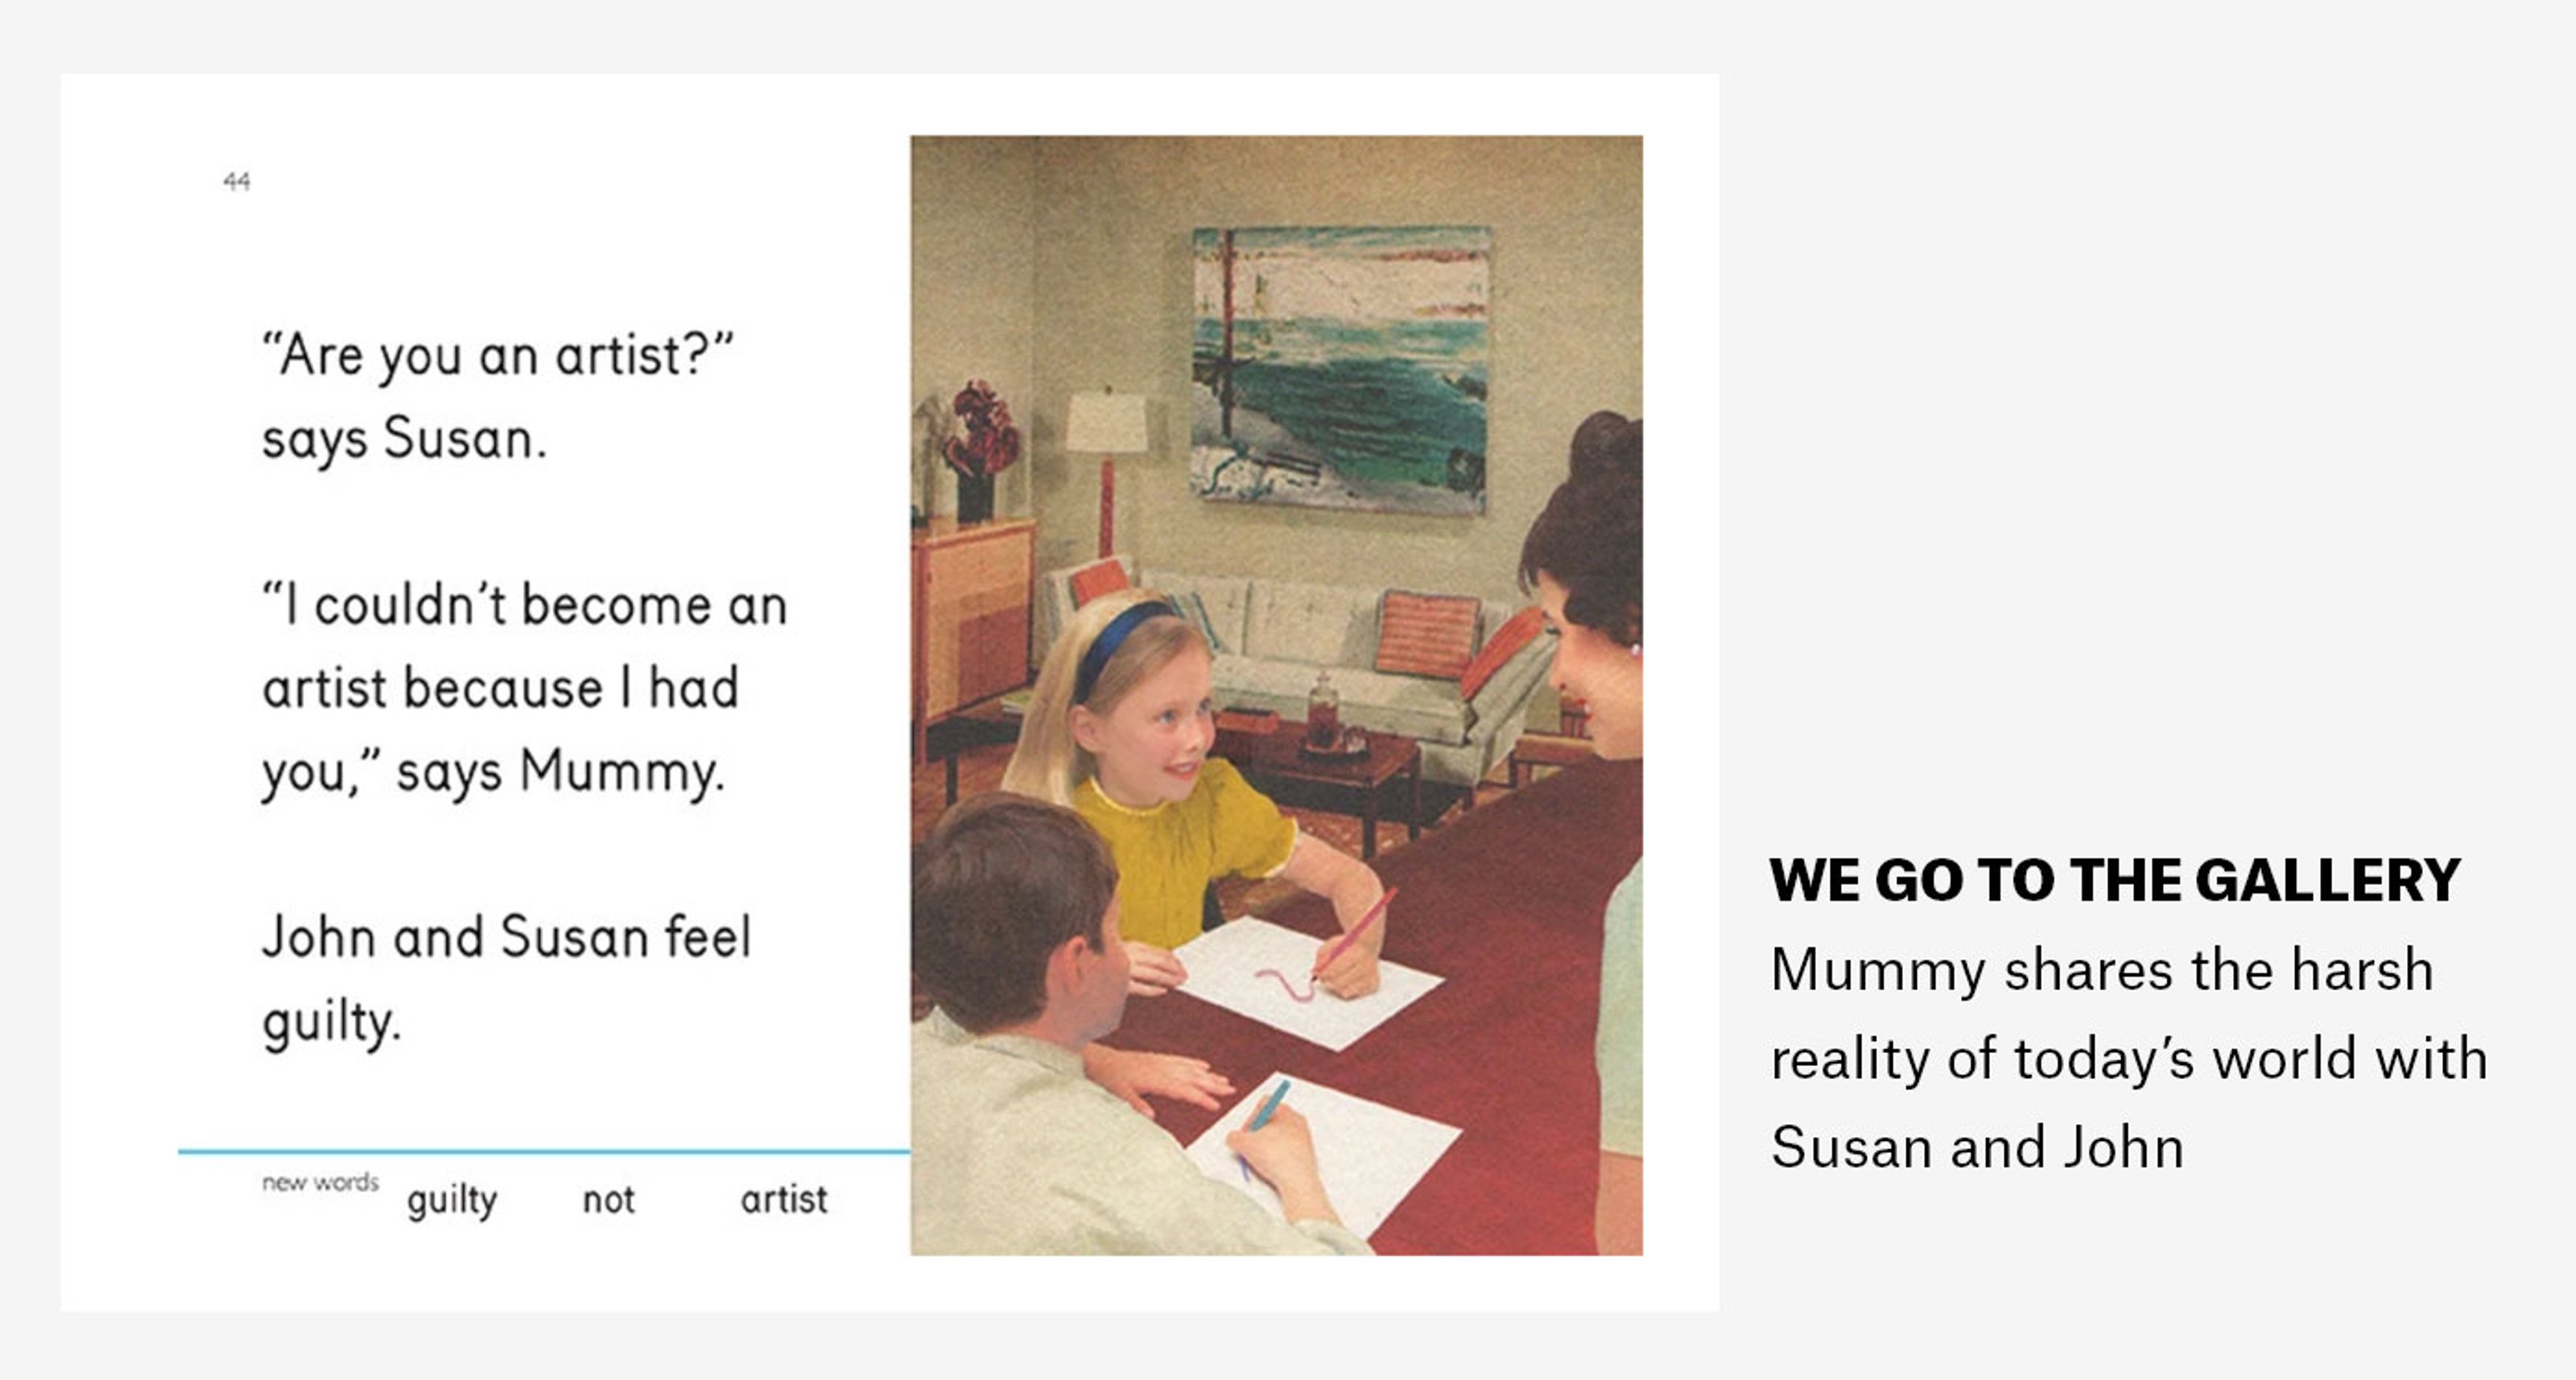 A photo of a page from the book "We go to the gallery"